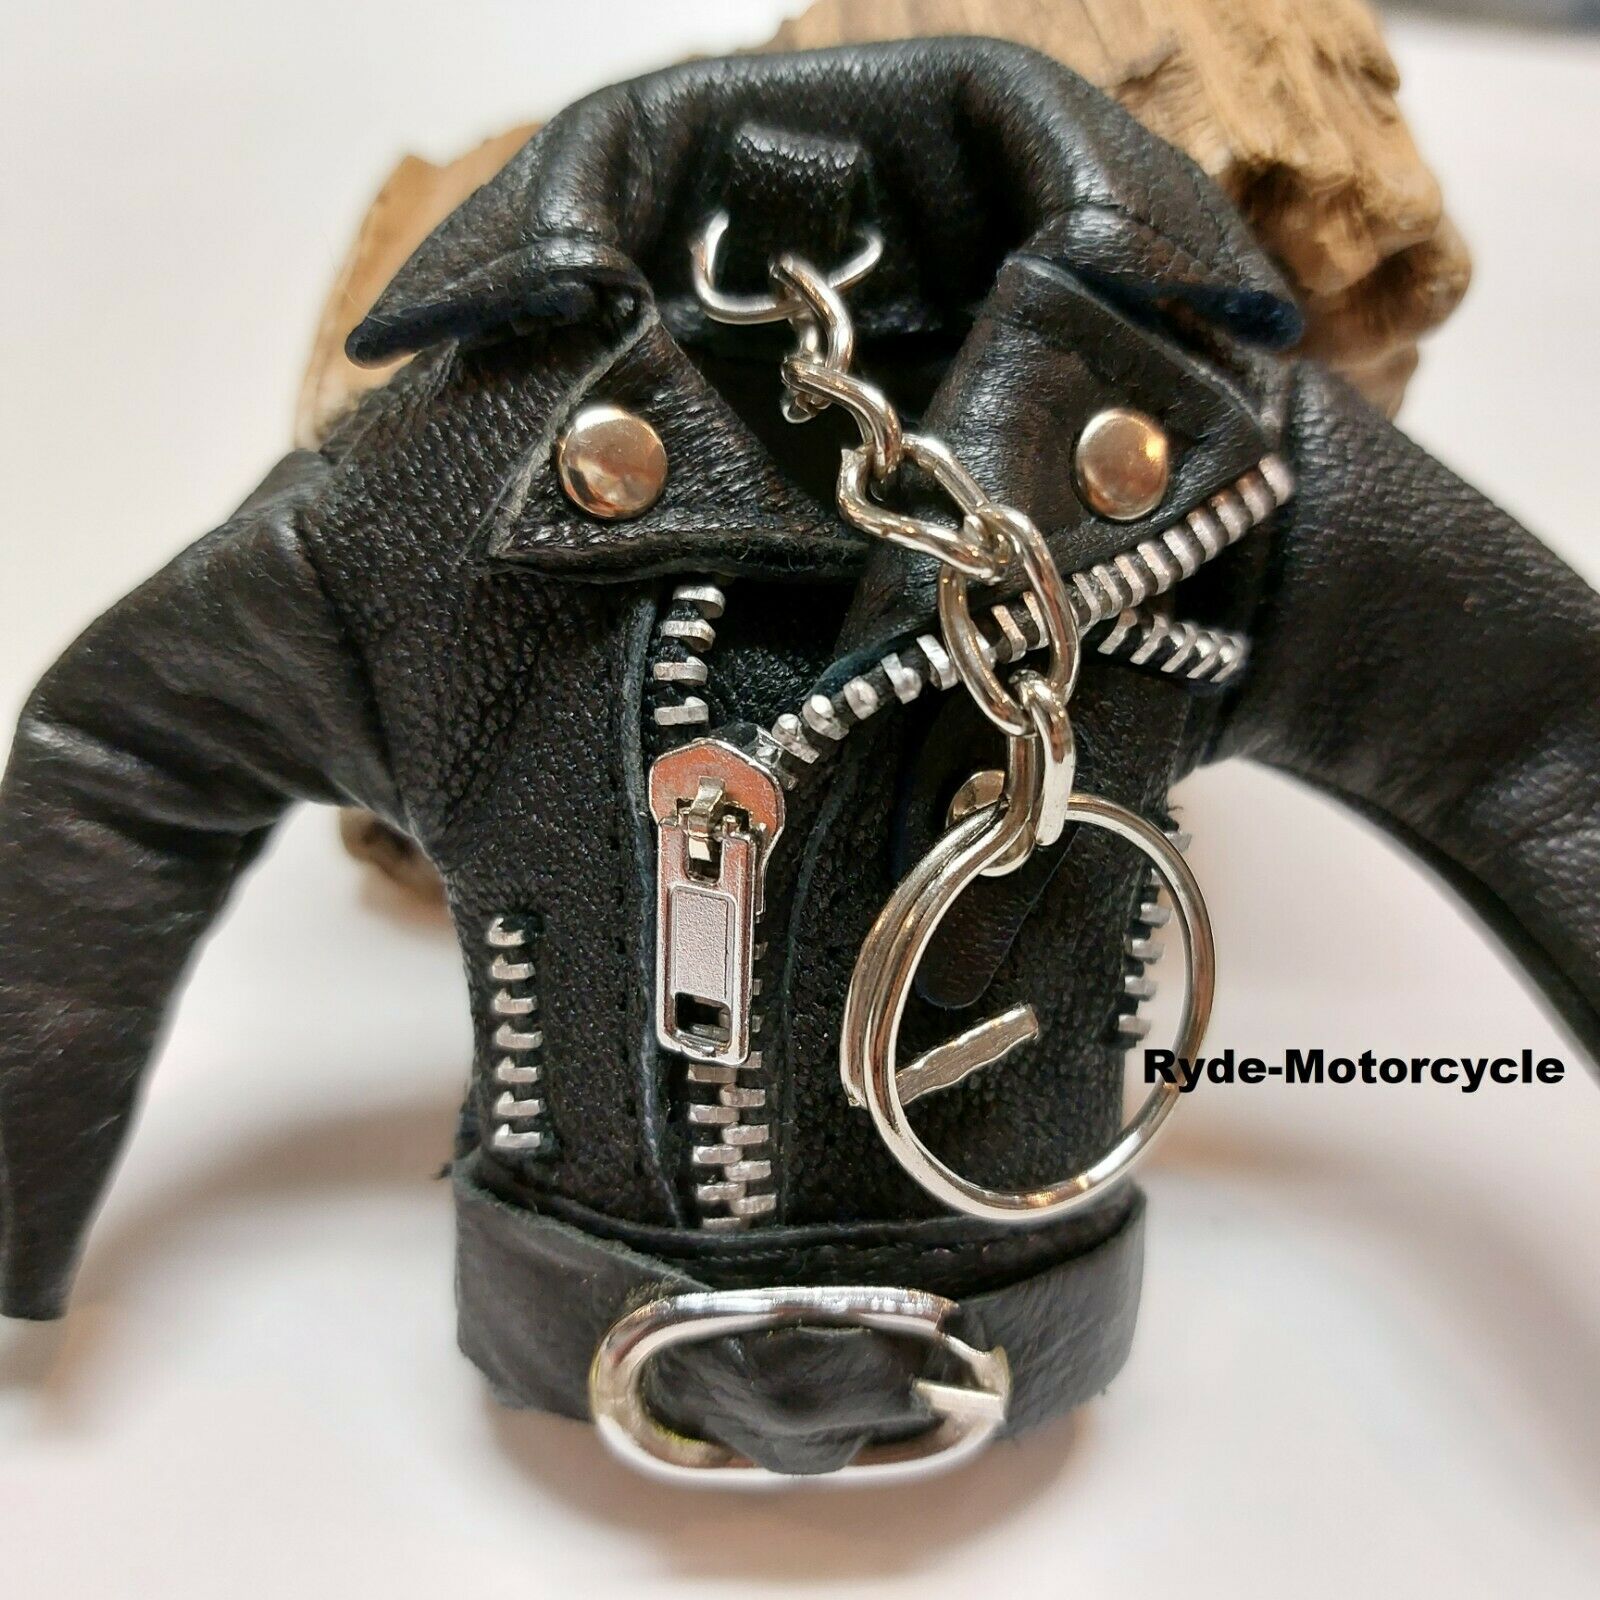 Motorcycle Leather Jacket Christmas Tree Ornament